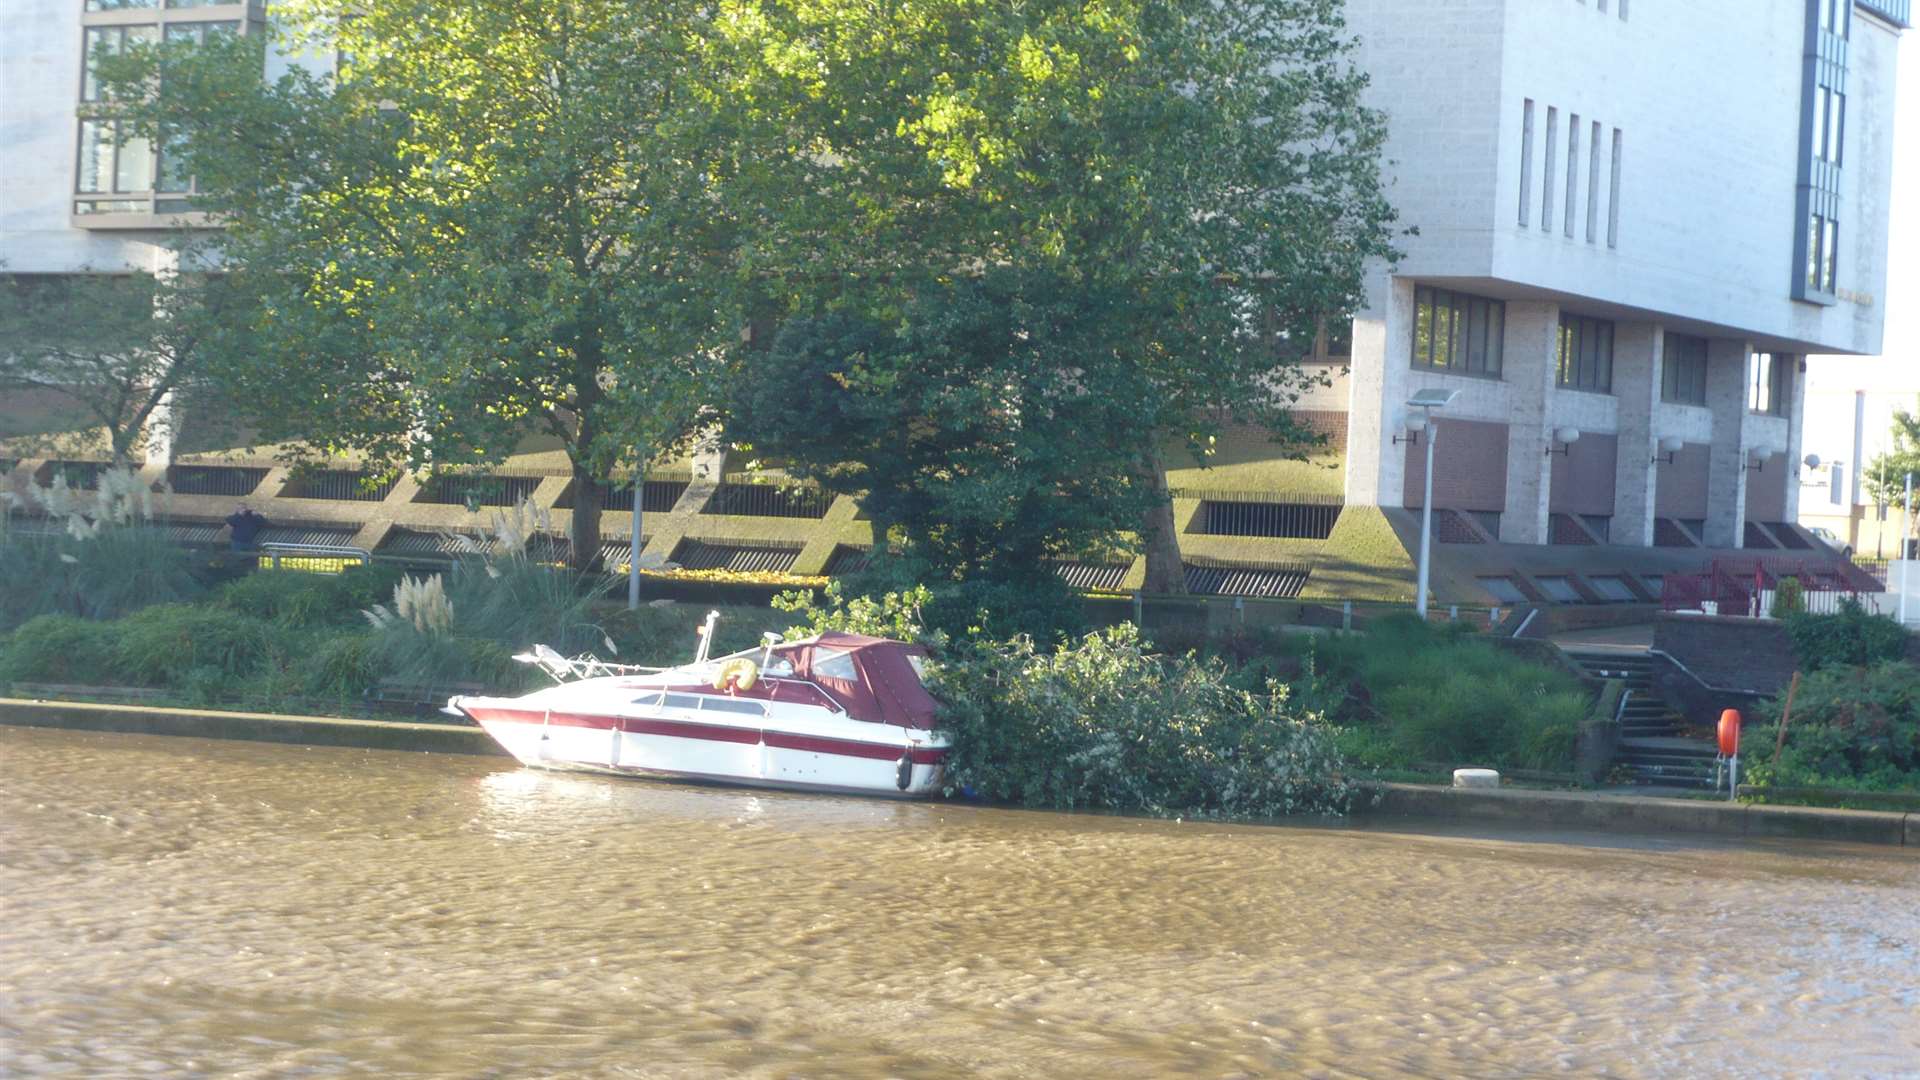 A tree has blown onto a boat moored by the Crown Court, Maidstone